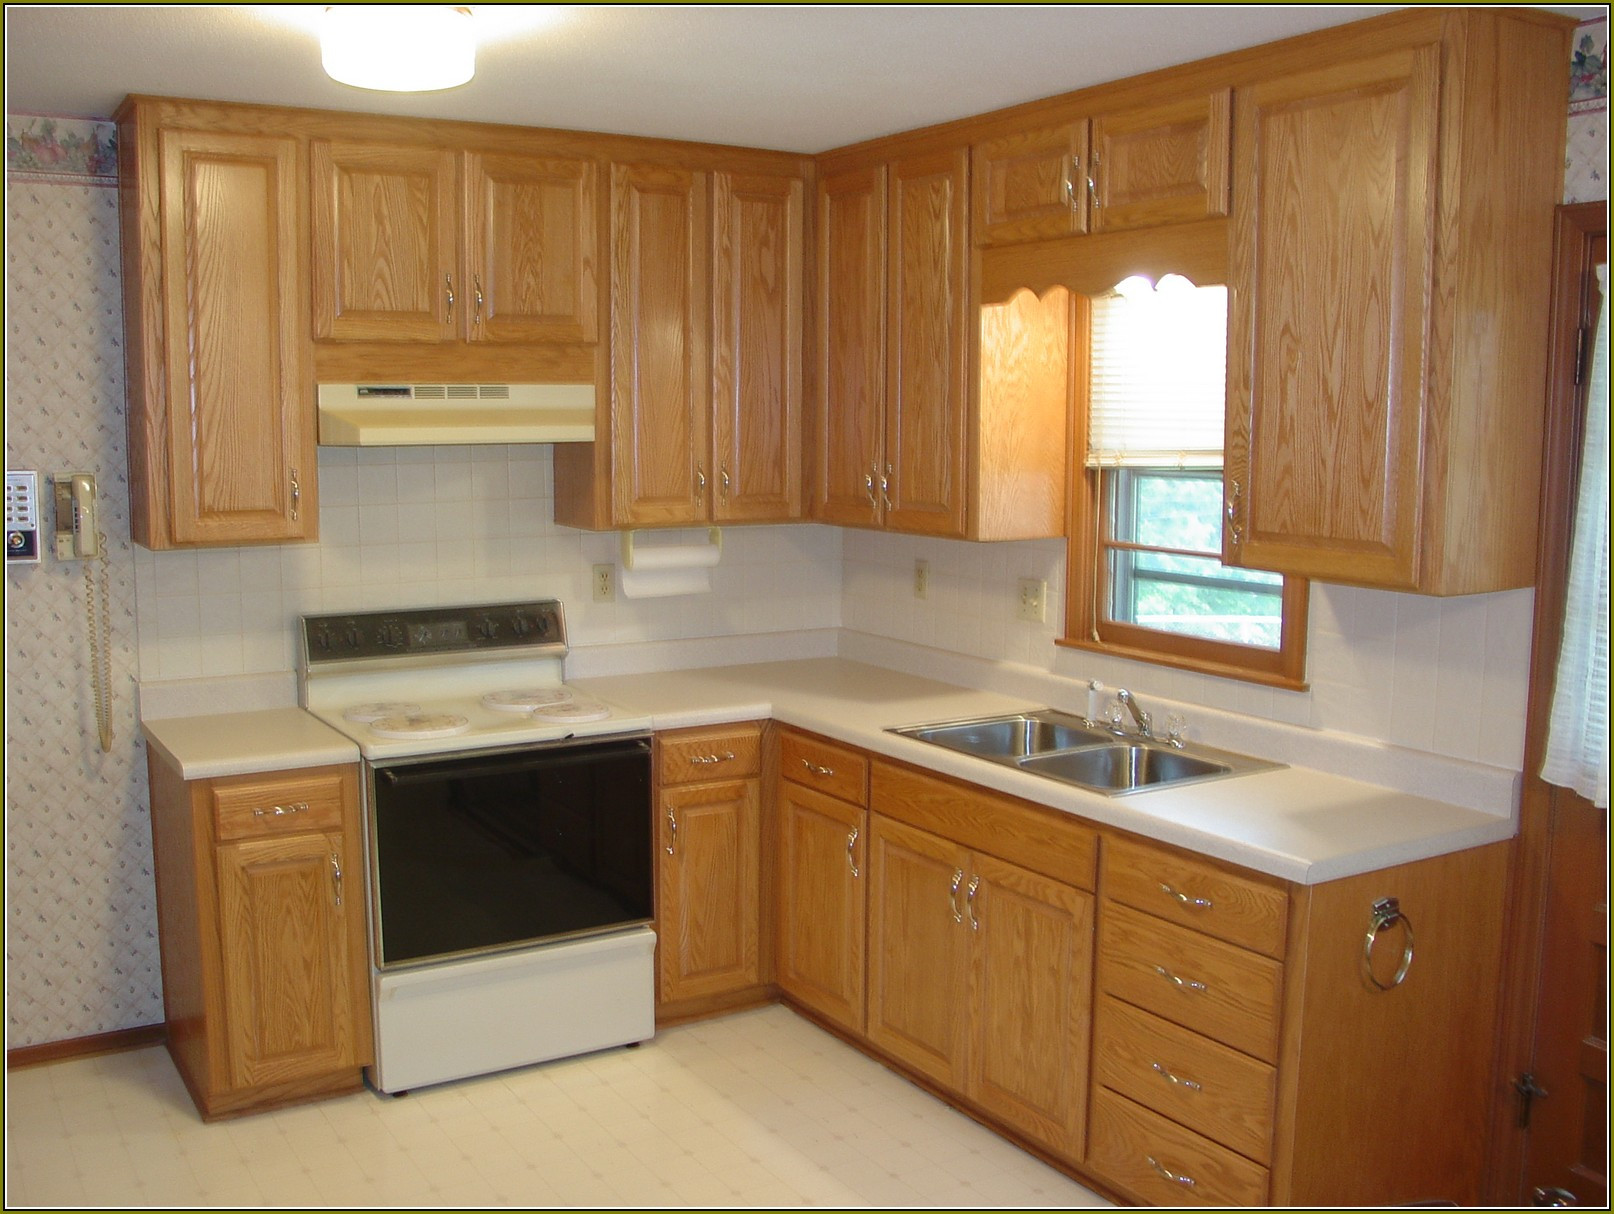 Lowes Unfinished Kitchen Cabinets
 Kitchen Make Your Kitchen Look Perfect With Kraftmaid